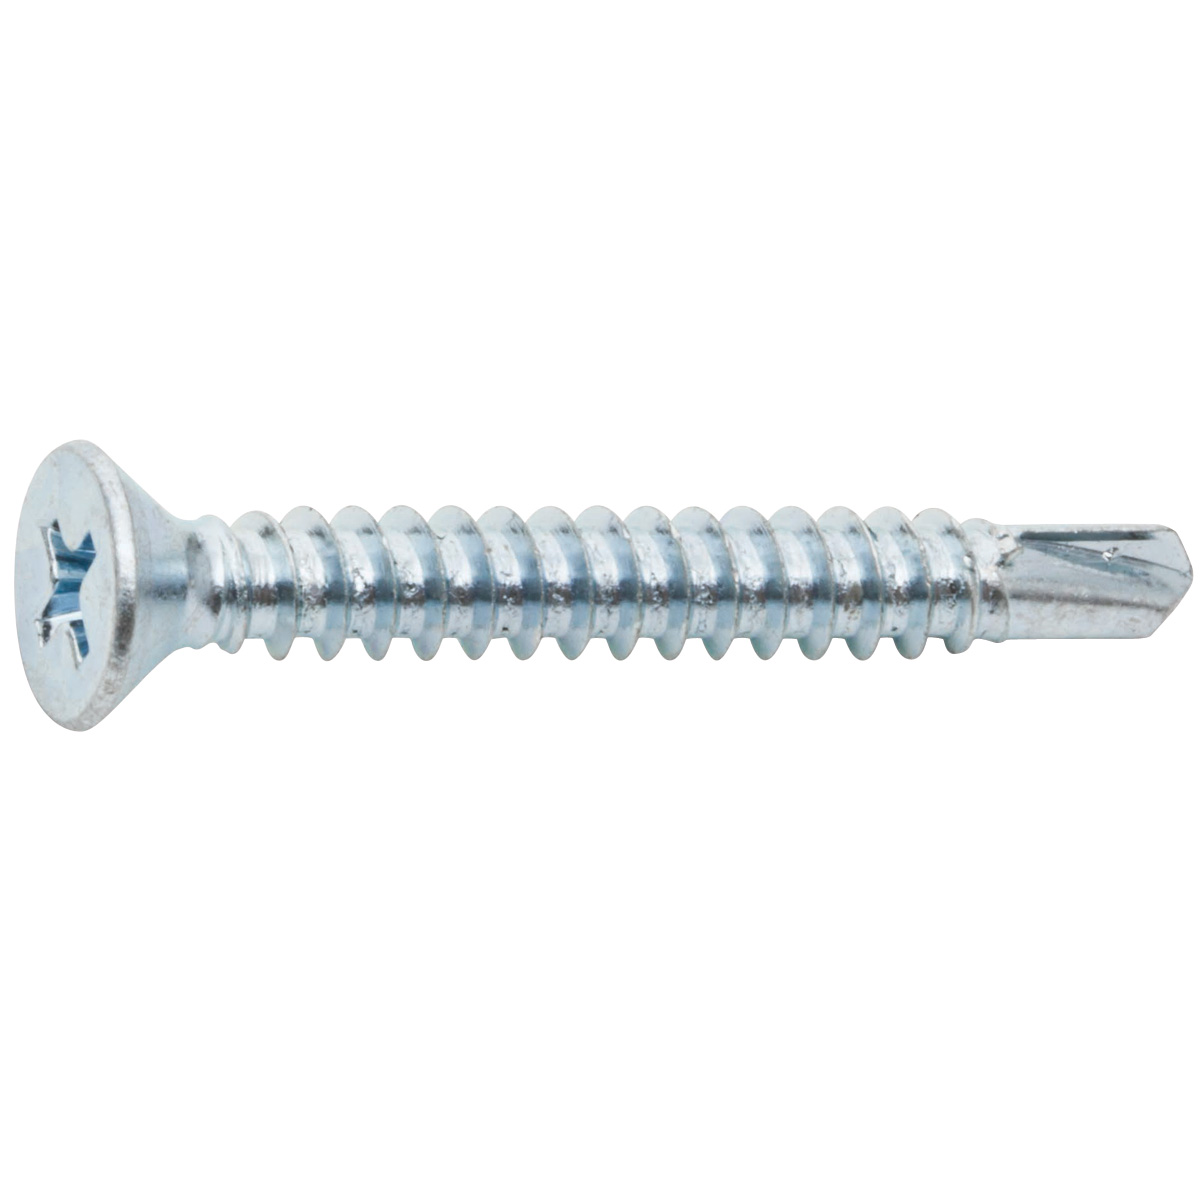 #6-20 Thread Size Steel Self-Drilling Screw Pan Head Phillips Drive Pack of 8000 1-1/2 Length 1-1/2 Length Pack of 8000 Small Parts 0624KPP #2 Drill Point Zinc Plated Finish 